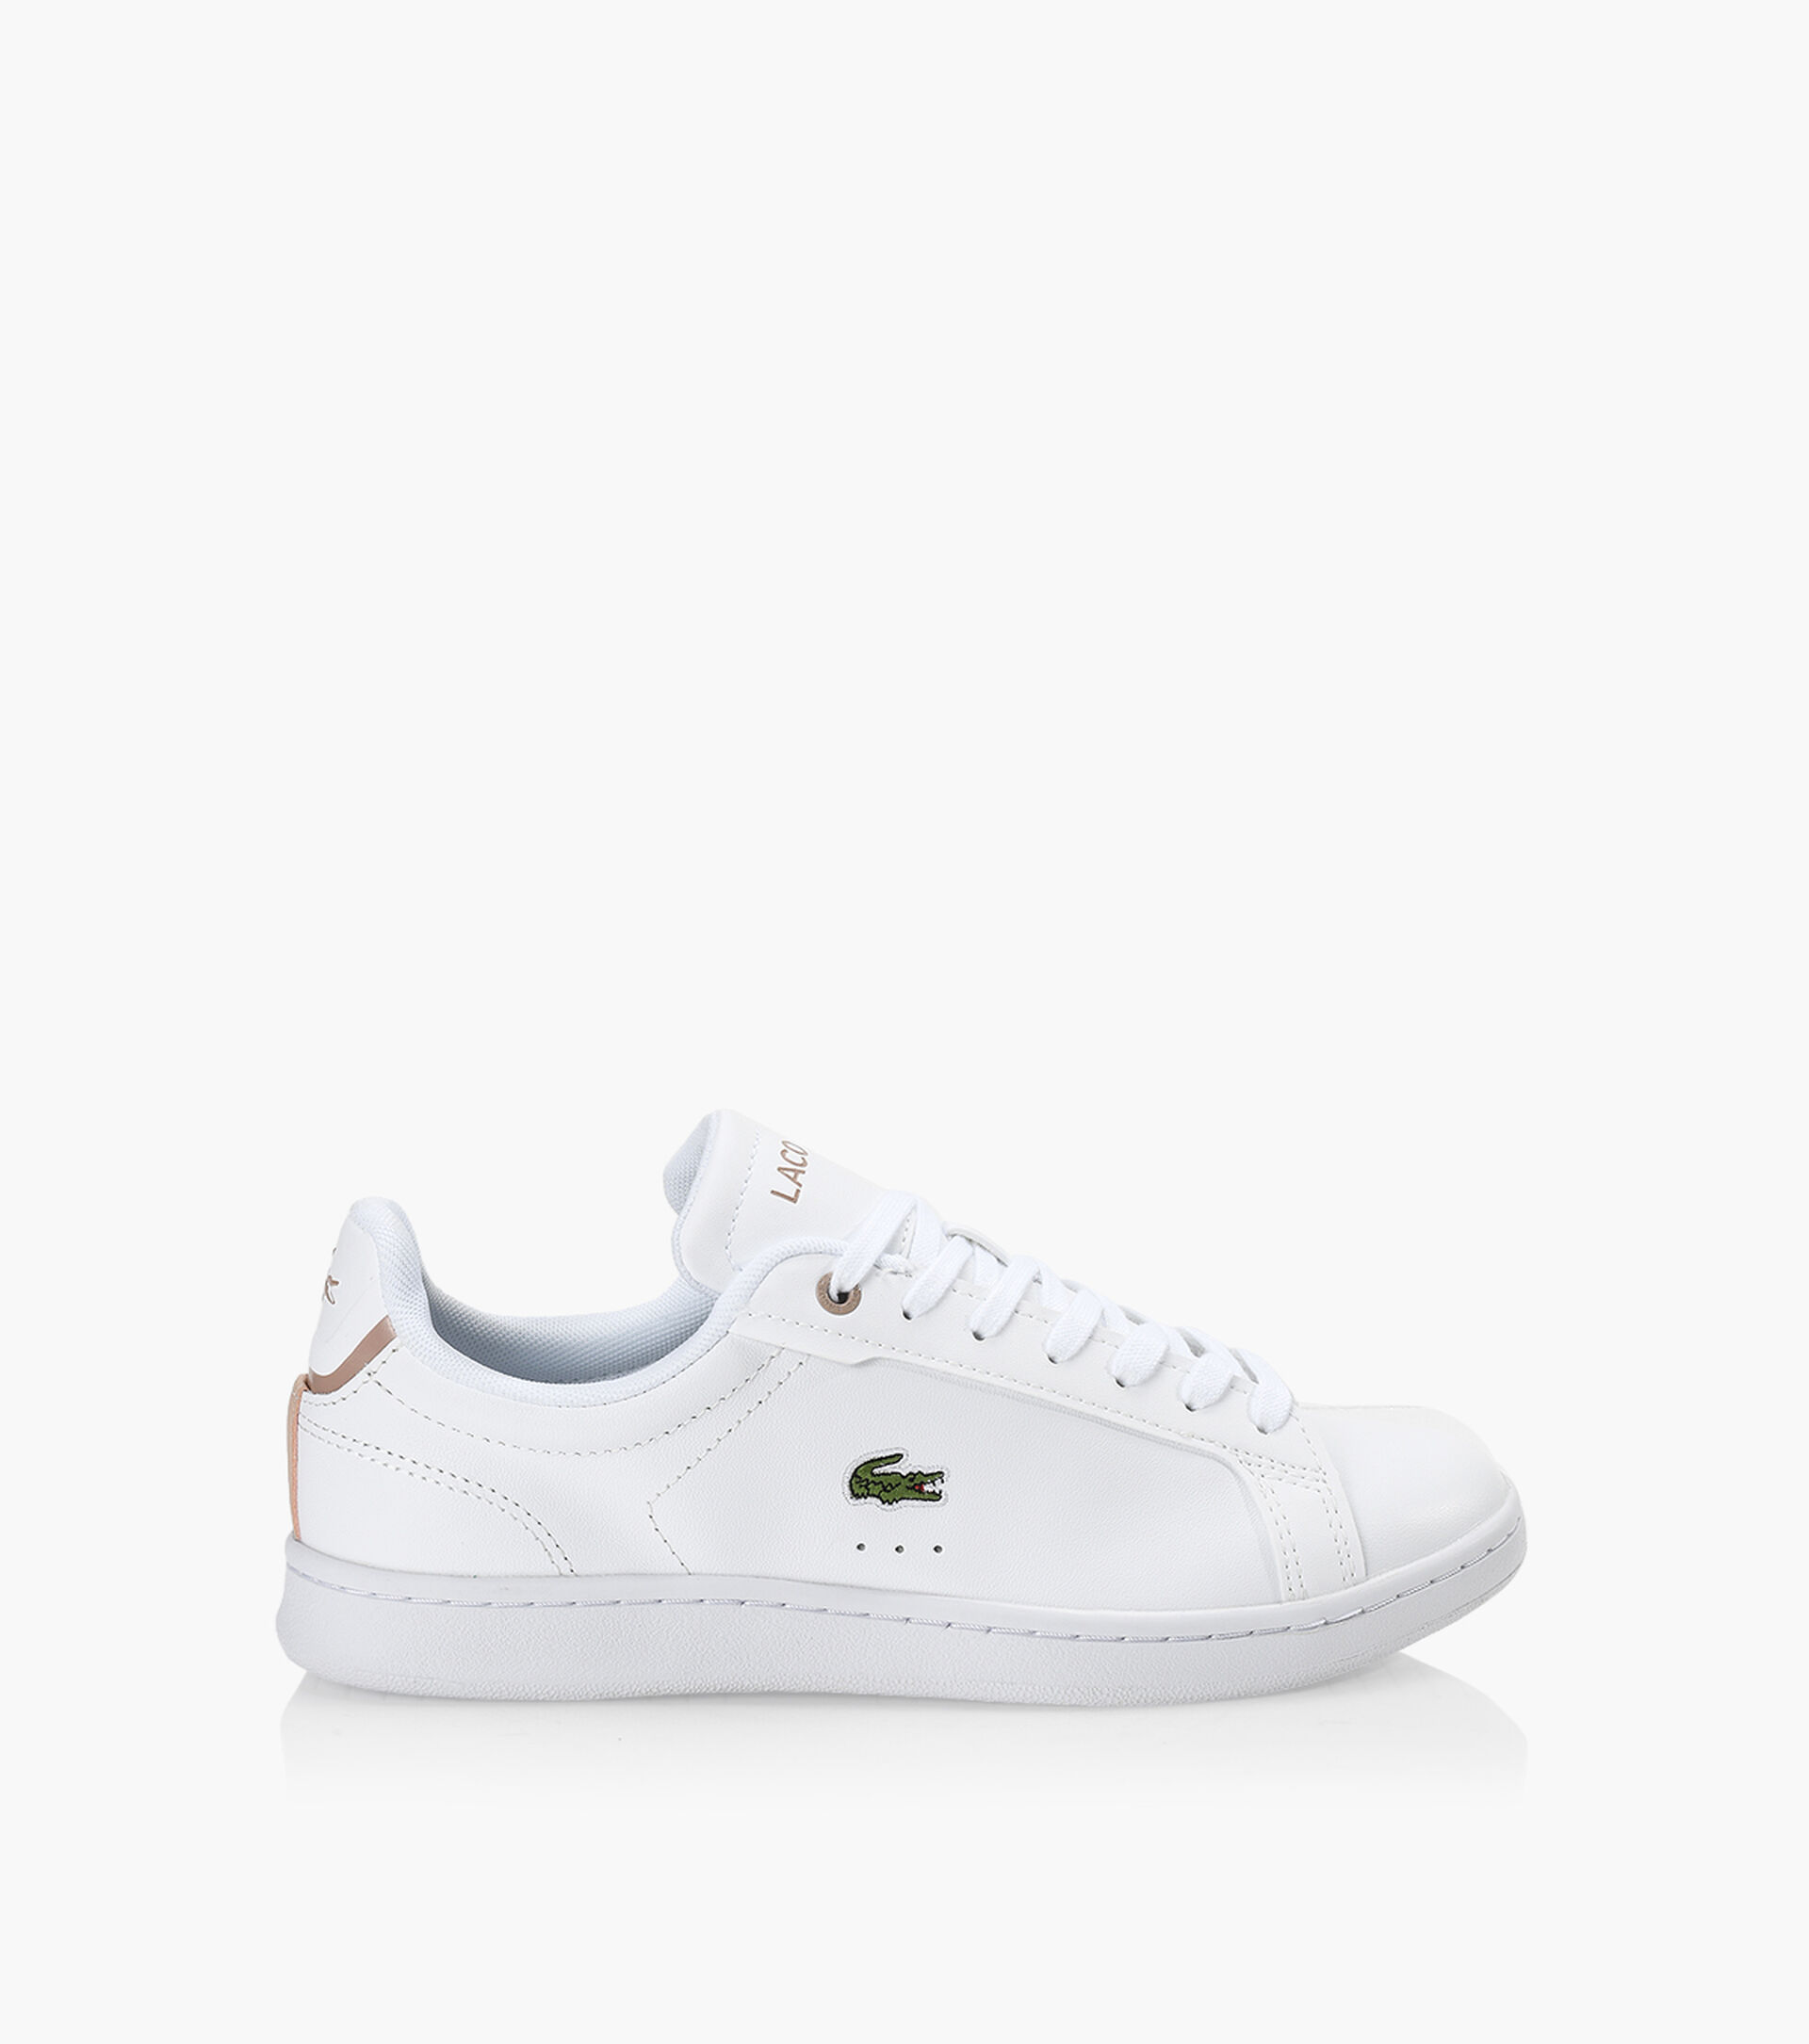 LACOSTE CARNABY PRO - White | Browns Shoes